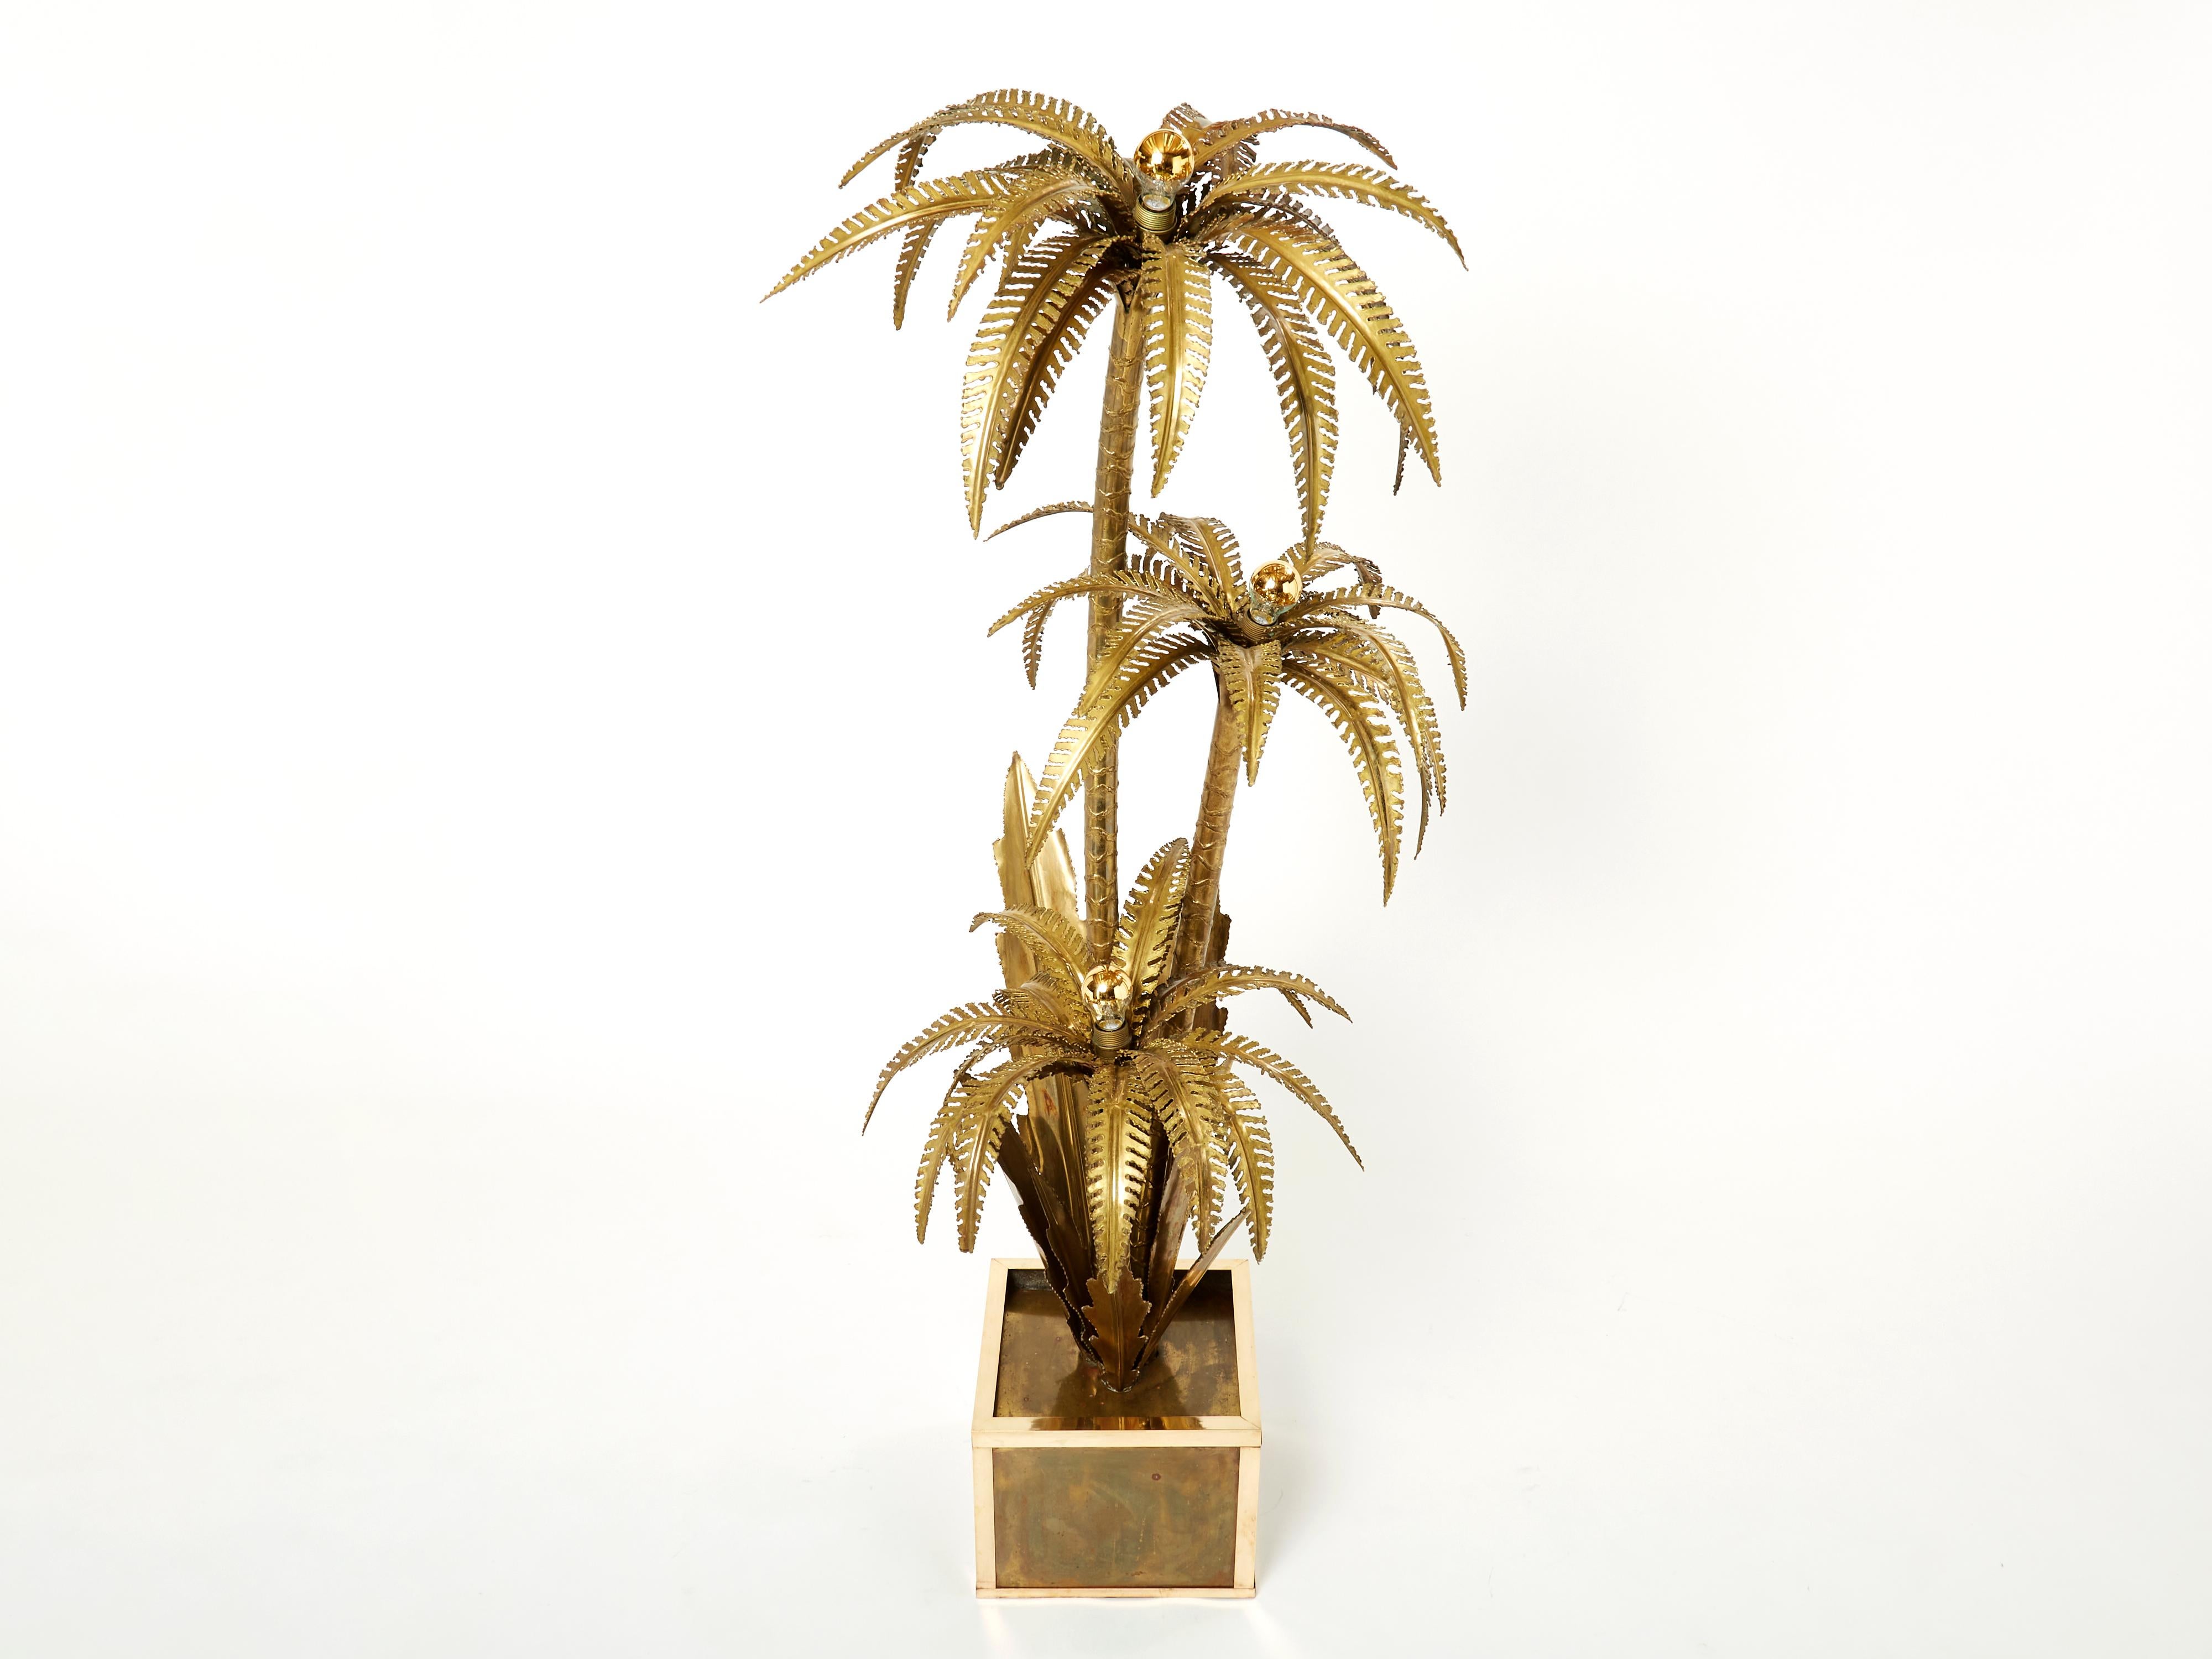 These palm tree floor lamps are one of the most iconic pieces by French design firm Maison Jansen. This rare example is made largely from bright brass, which gives it an air of high-end glamour. But what makes the Jansen palm tree pieces most